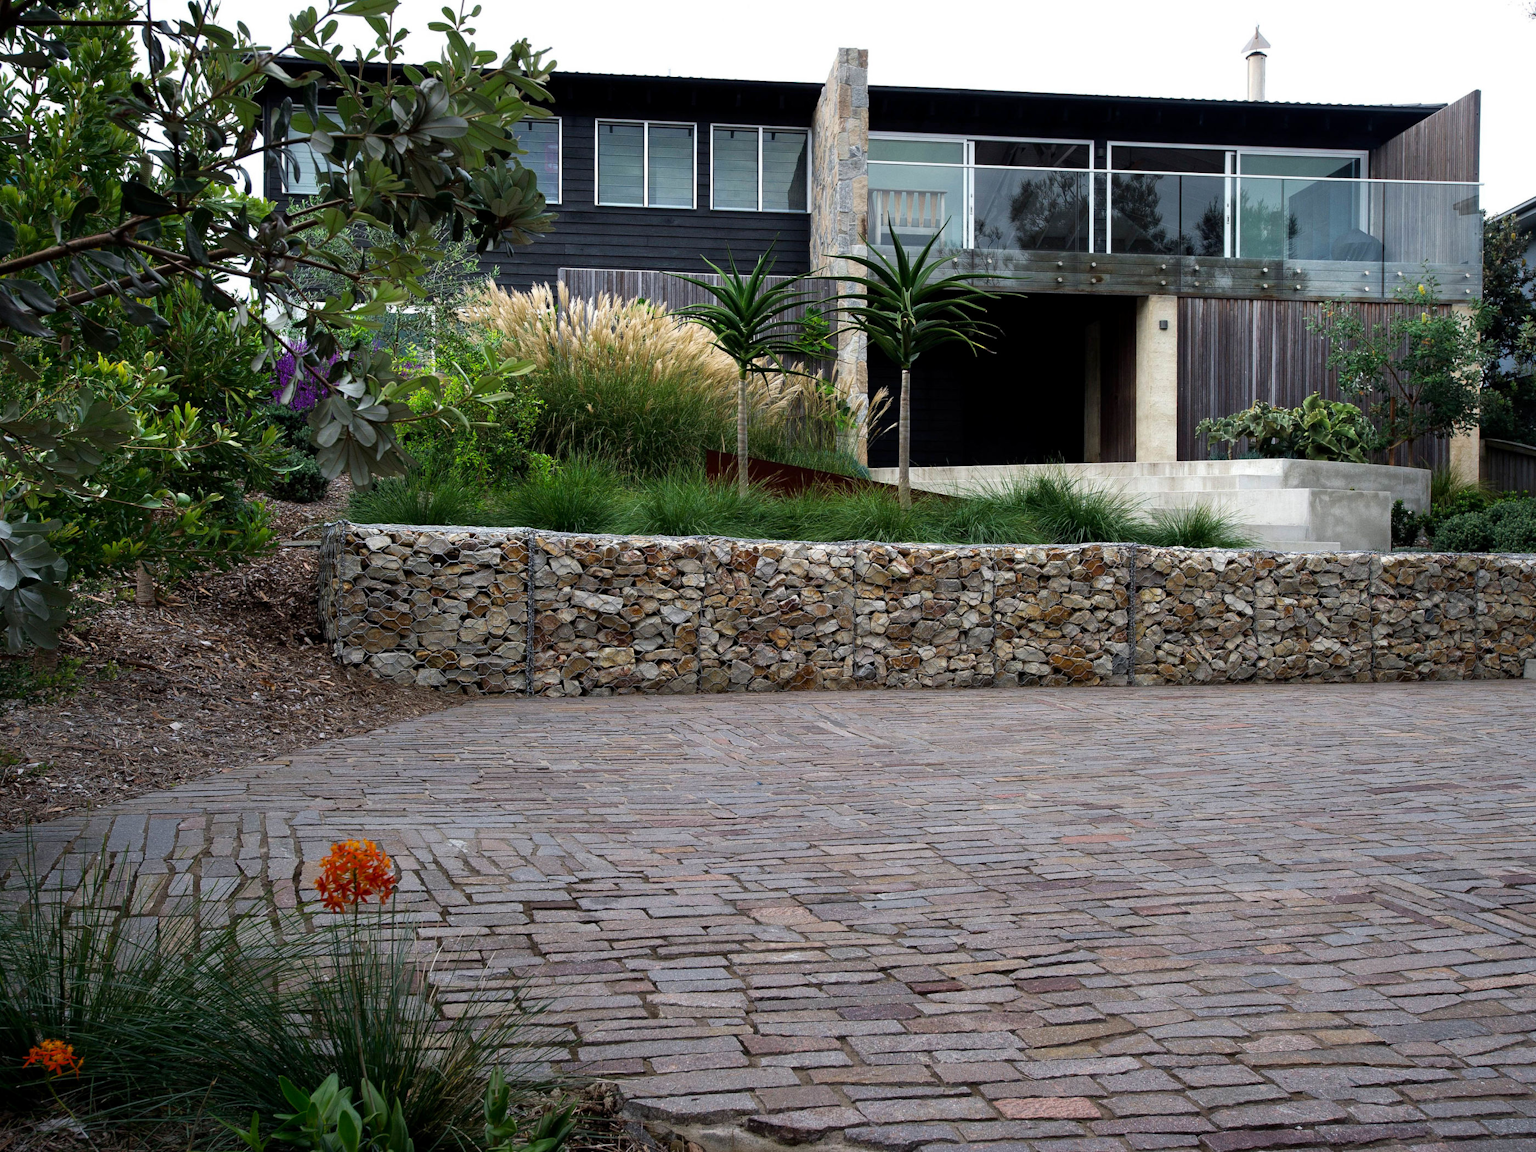 Porphyry filetti driveway, stone gabion wall in front of organic style beach house